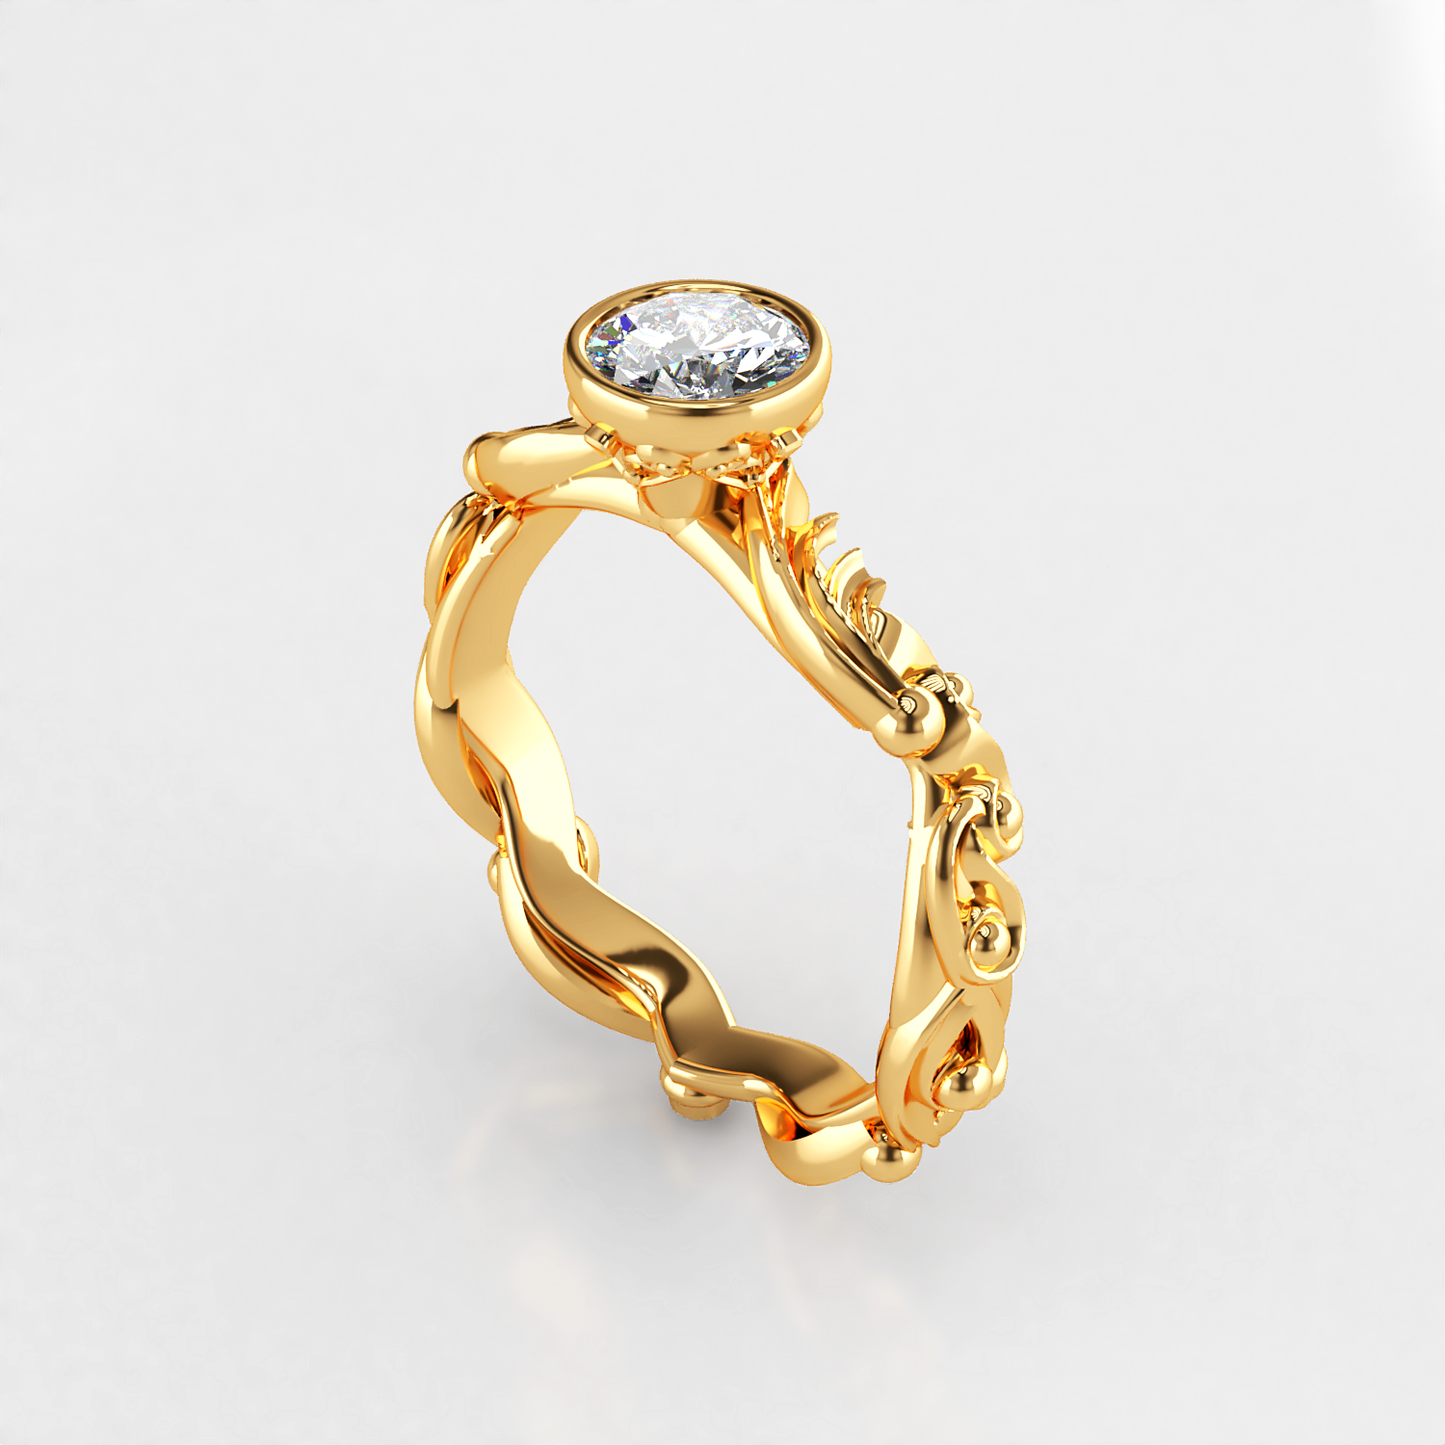 Vintage: Floral Diamond Engagement Ring in 18ct Yellow Gold